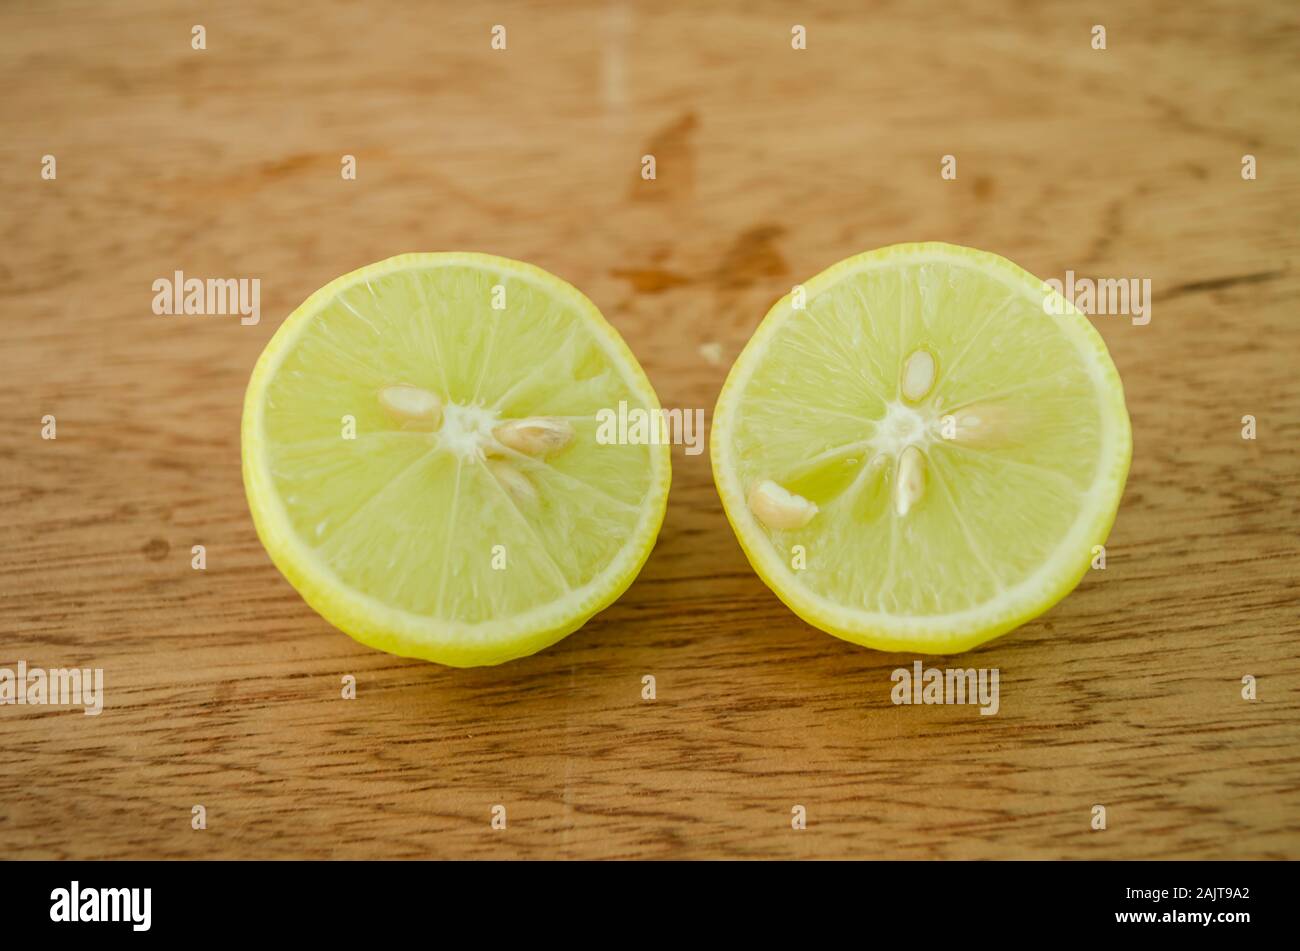 key Lime Cut In Two Showing Its Cross Section Stock Photo